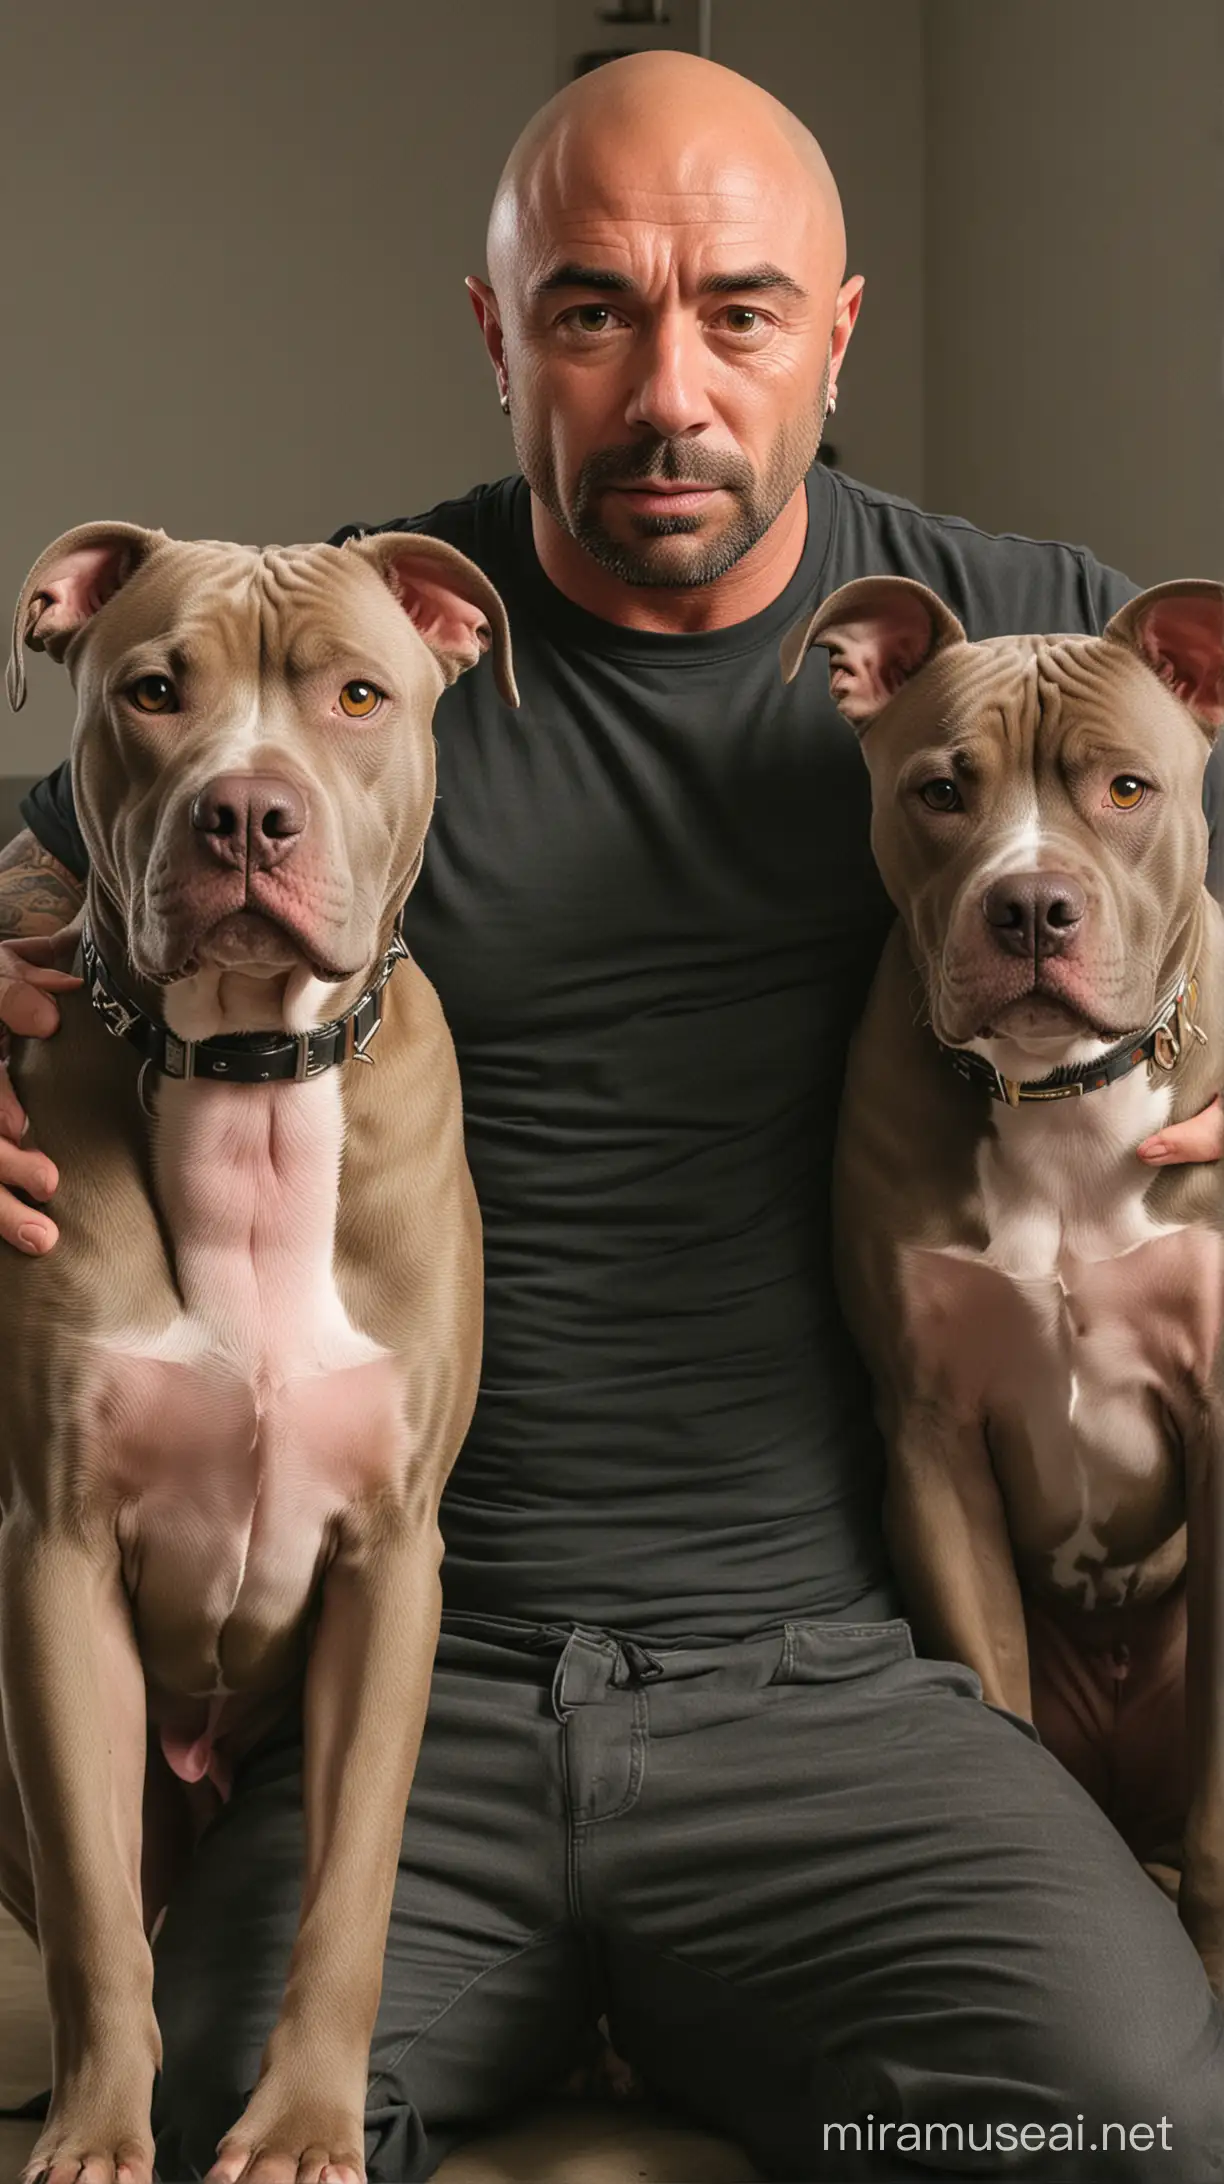 Joe Rogan with His Two Senior Pitbull Dogs in a Reflective Moment